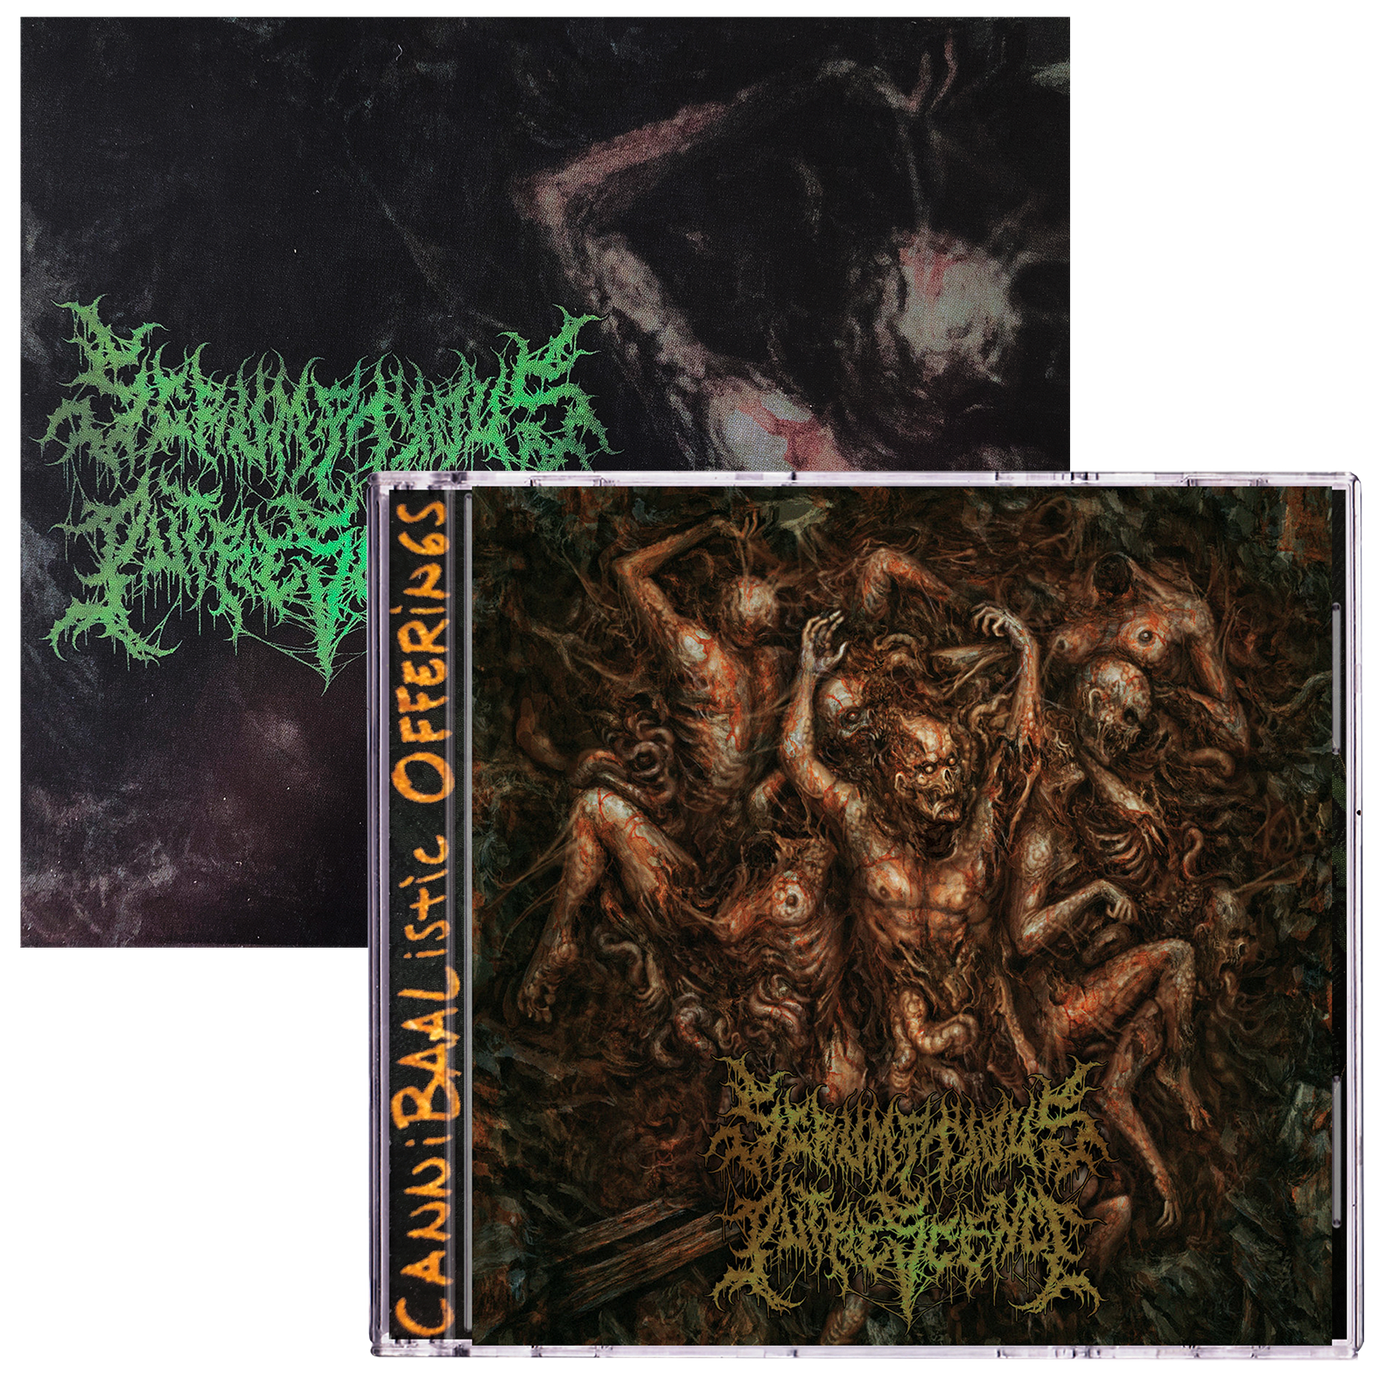 Scrumptious Putrescence 'CanniBaalistic Offerings' CD